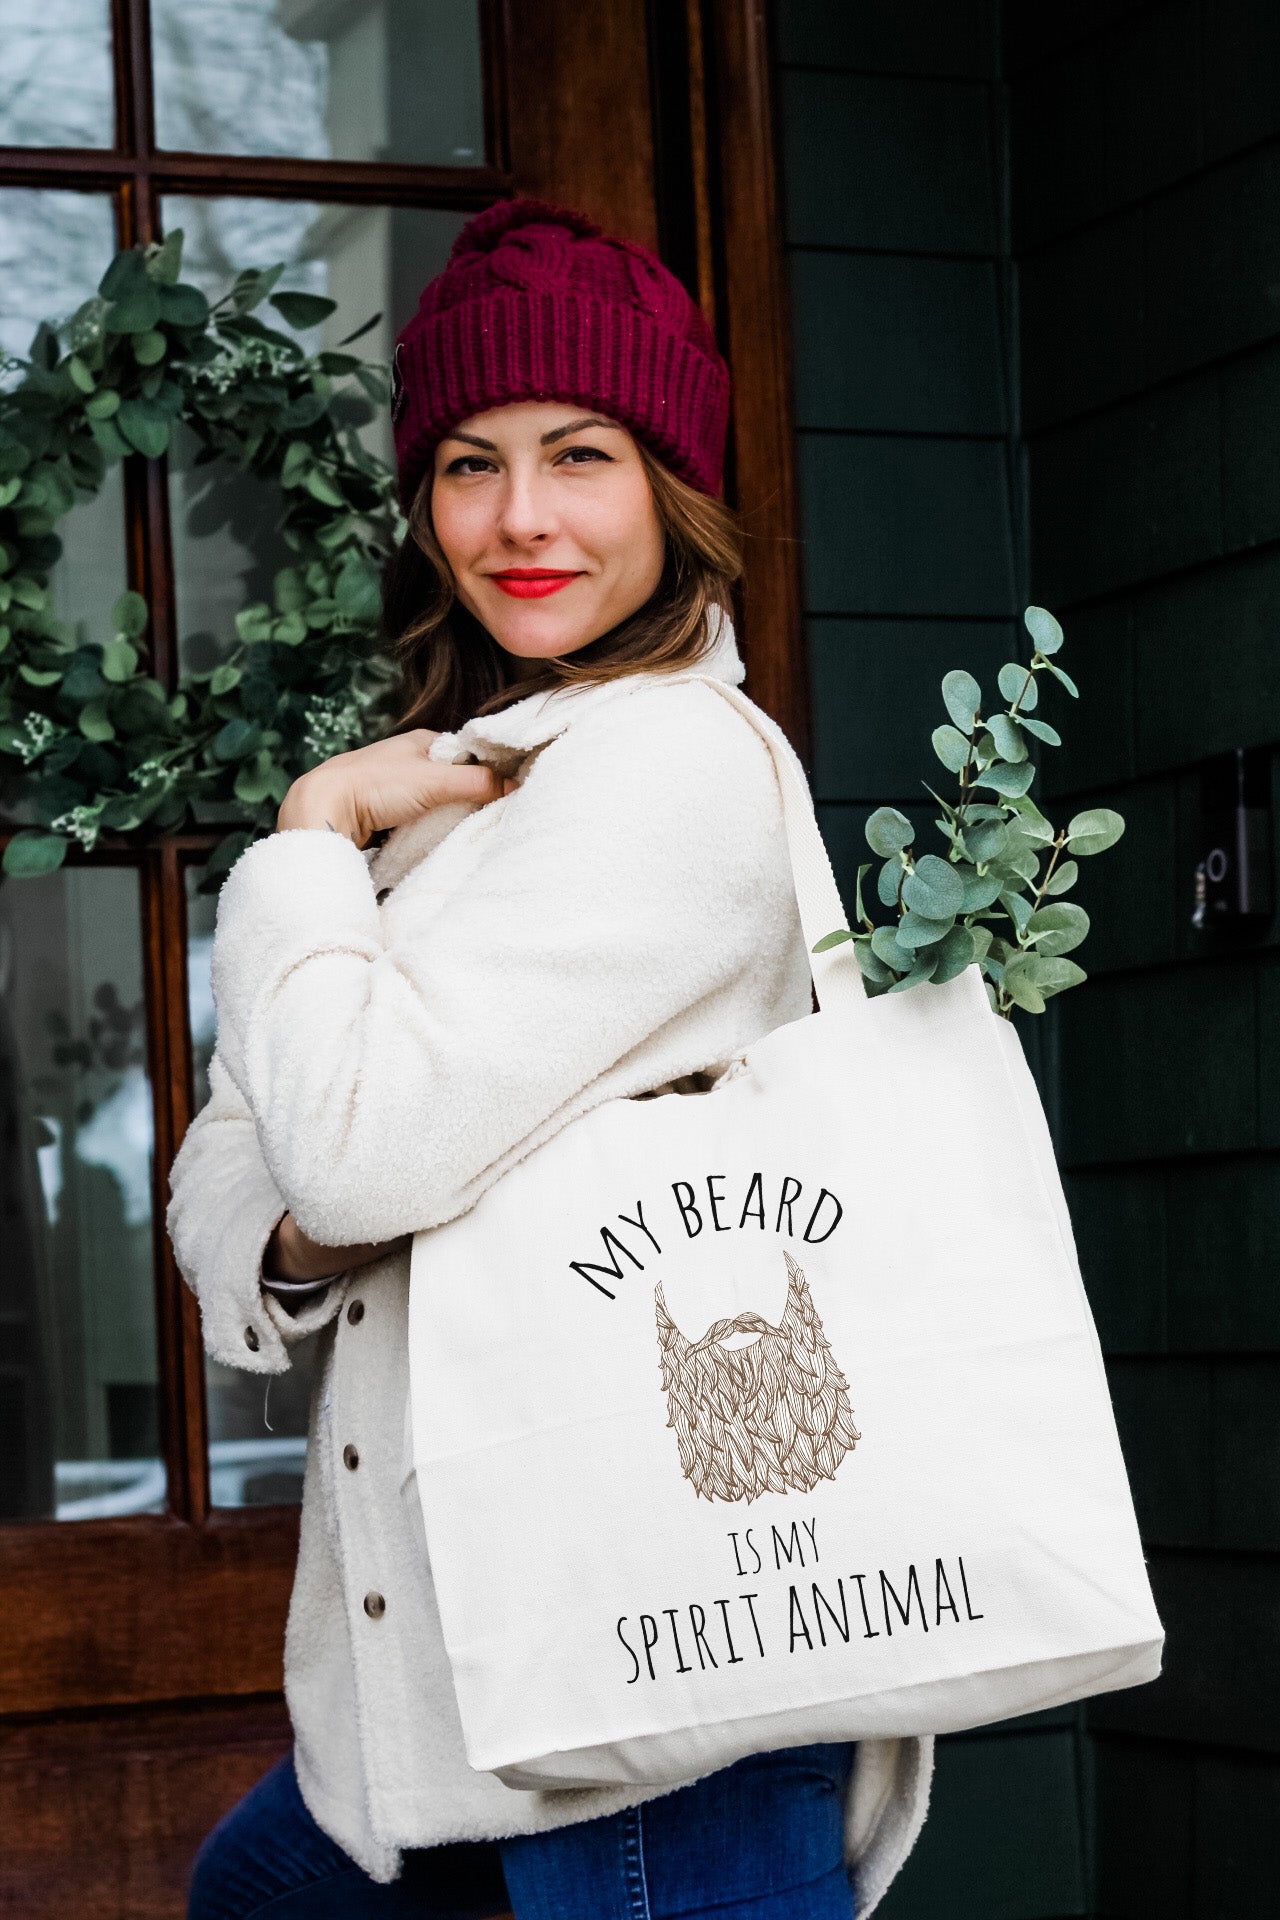 a woman carrying a bag that says my beard is my spirit animal